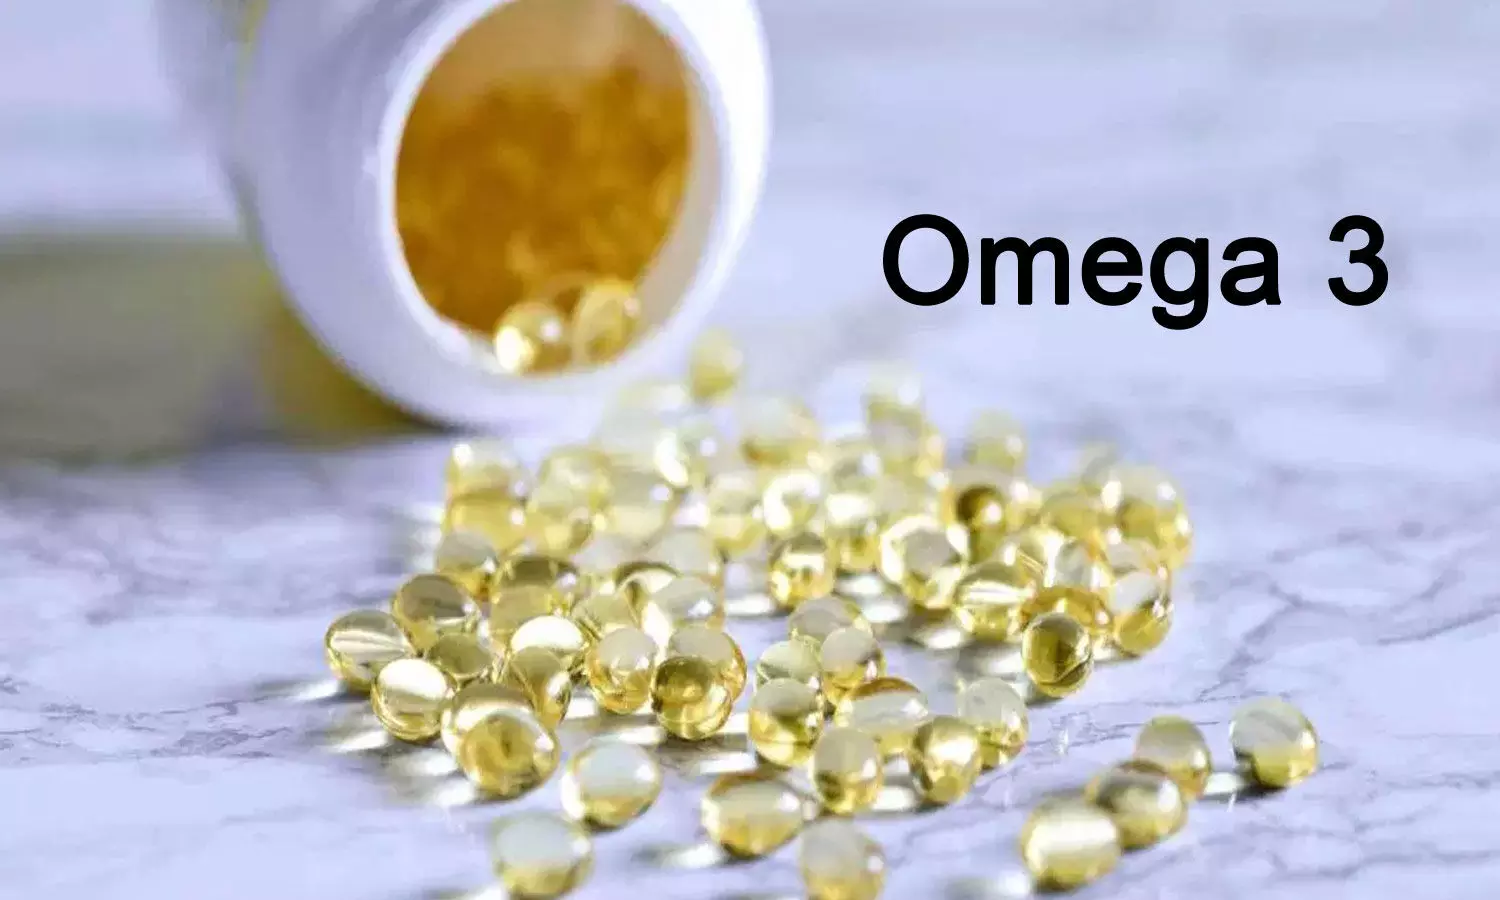 Omega-3 supplementation significantly reduces homocysteine levels, lowering CVD risk: Study